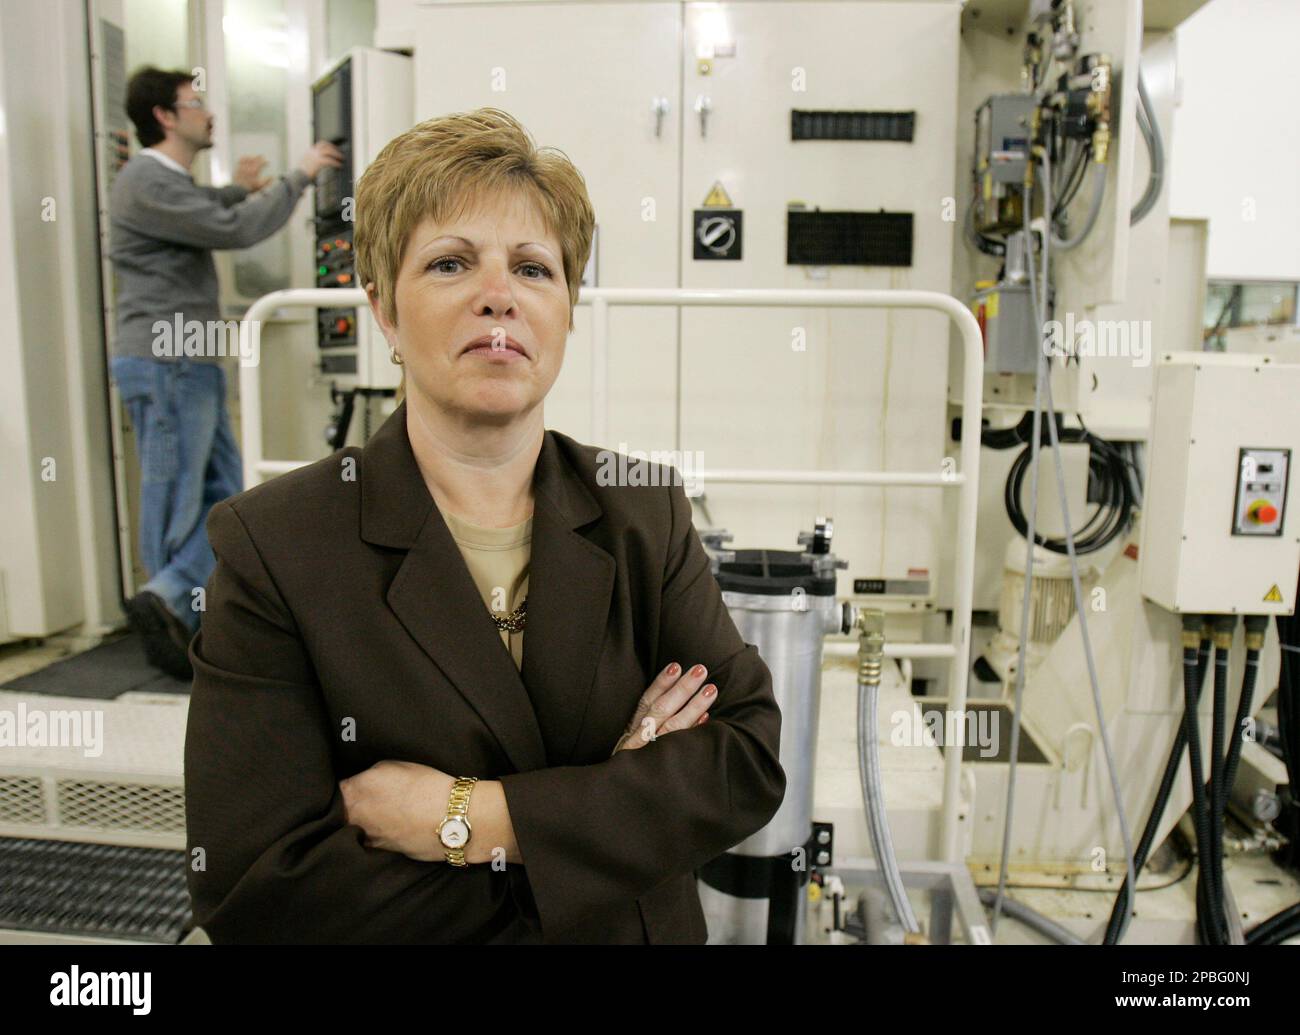 Mary Pat Salomone, president and CEO of Marine Mechanical, poses as Ray  Hill works on a CNC milling machine, Wednesday, April 11, 2007, in Euclid,  Ohio. The nation has shed five million